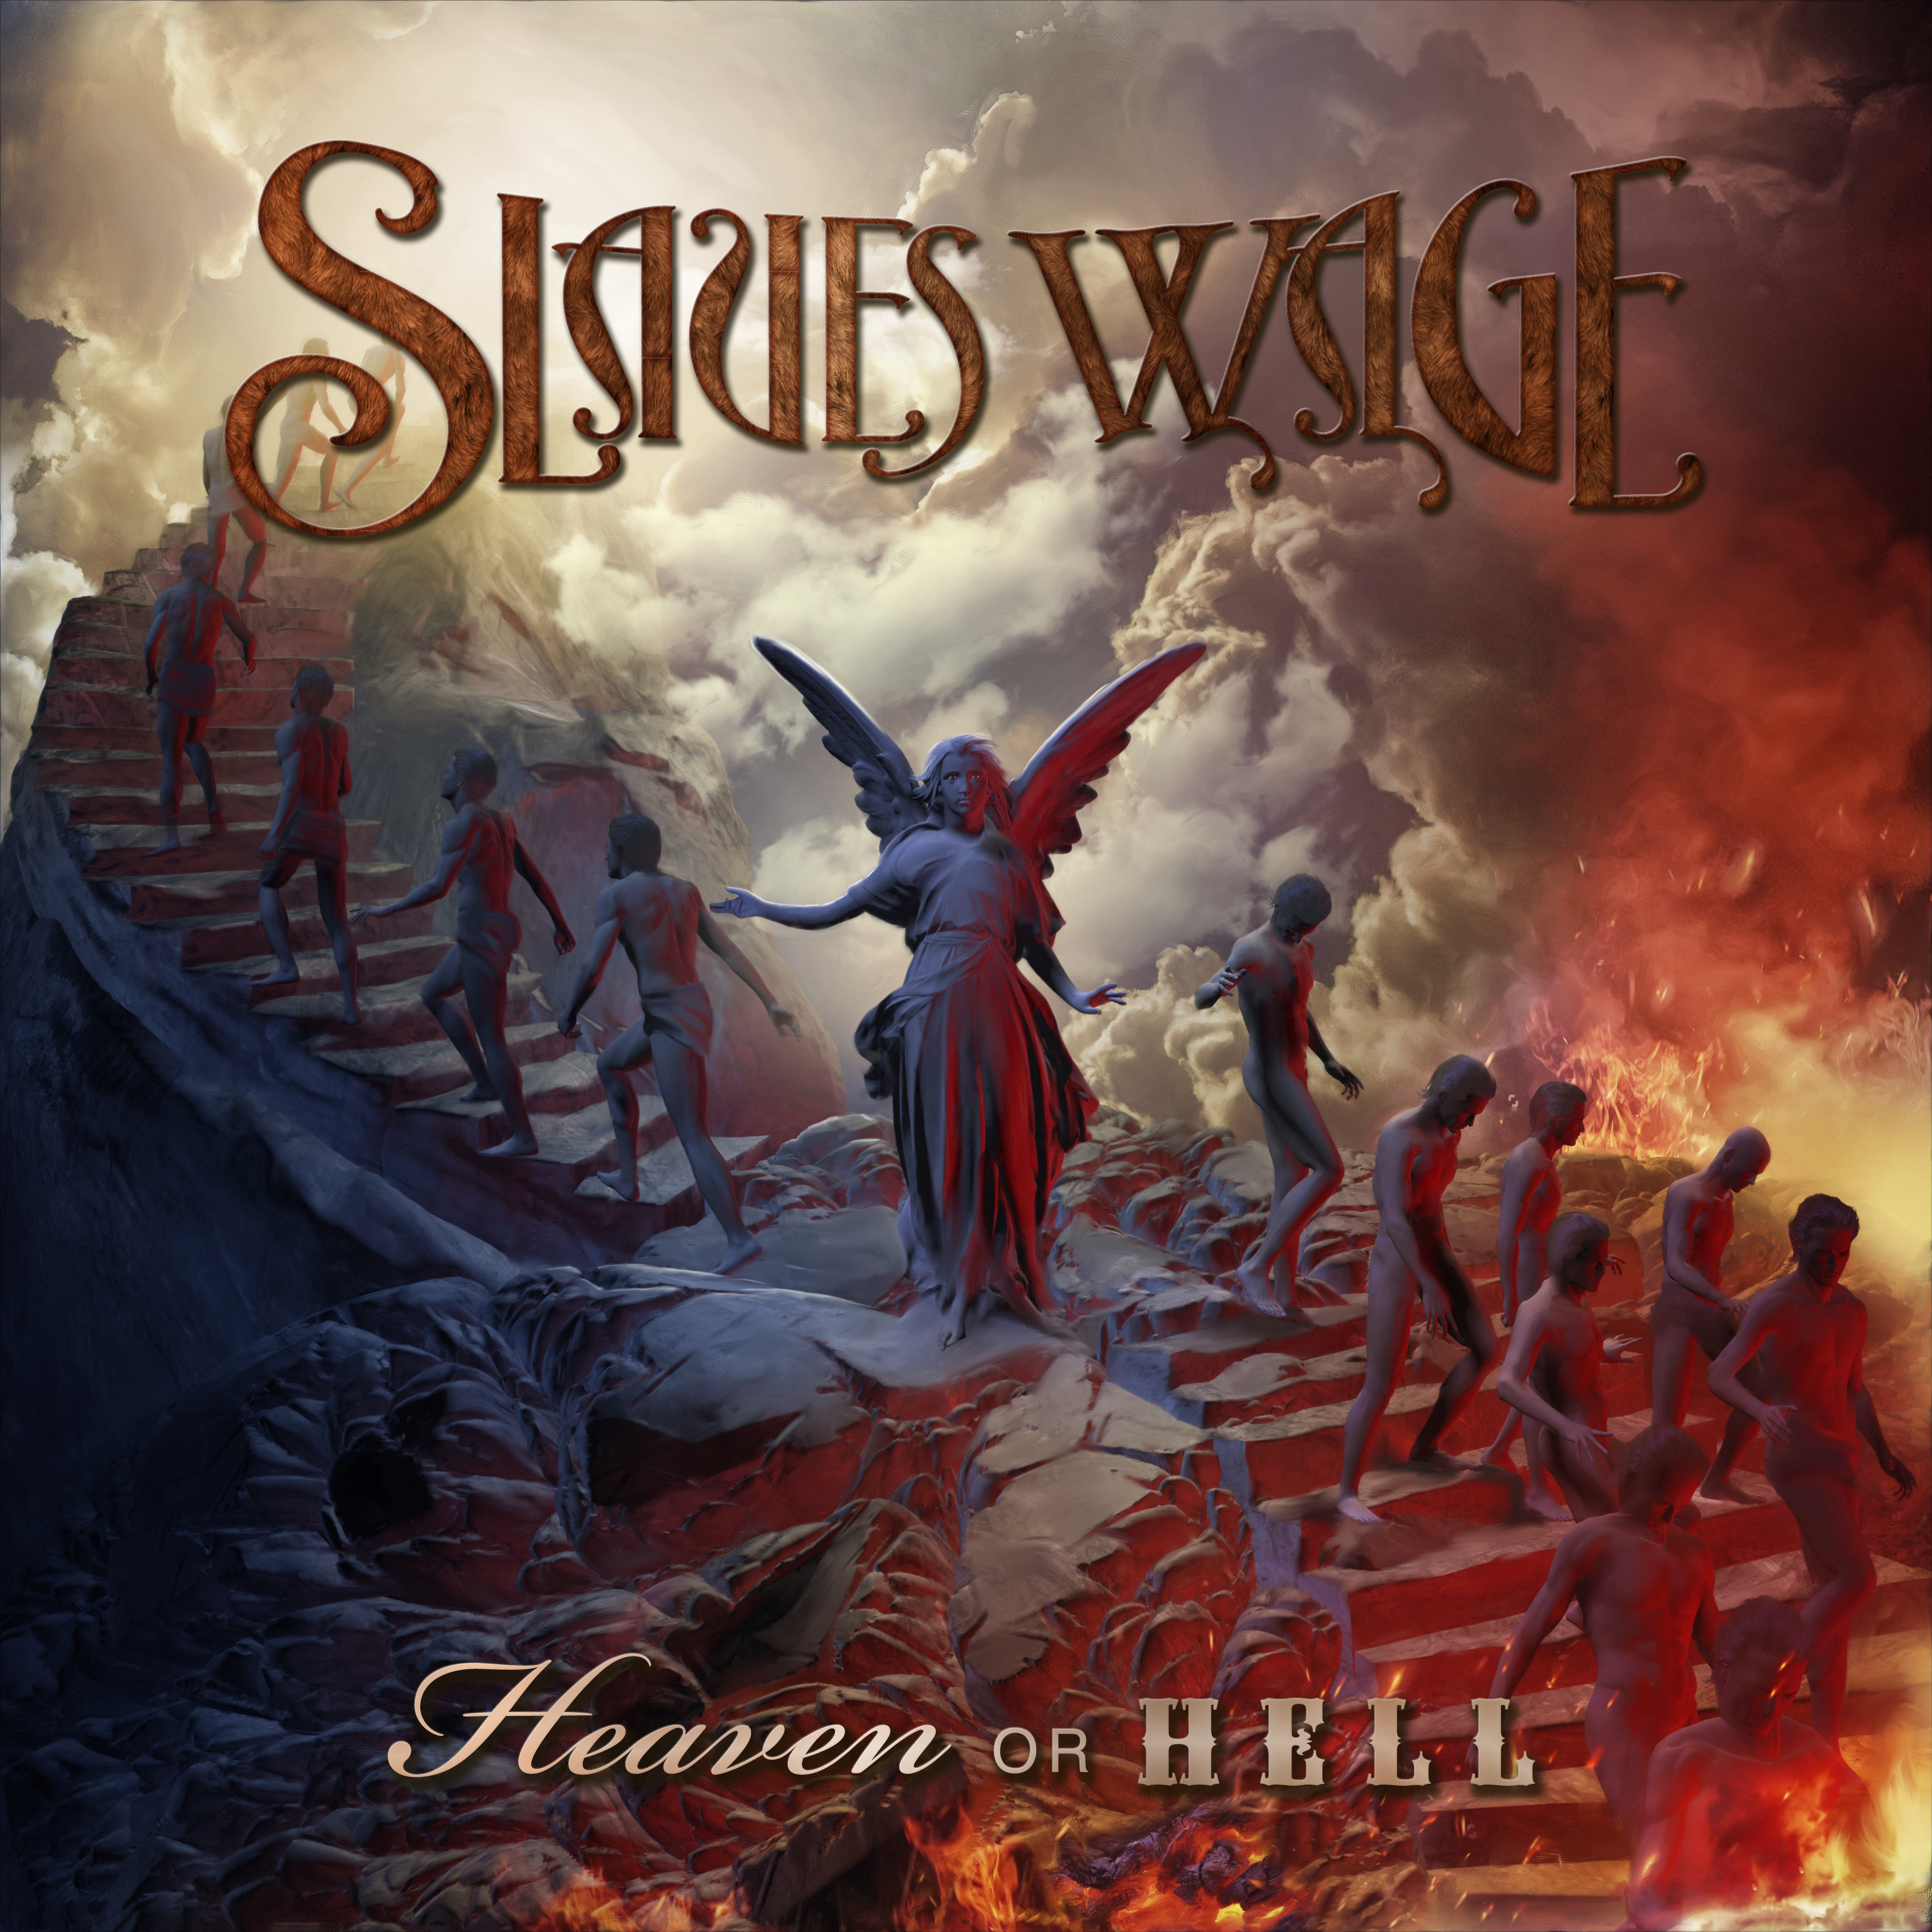 Art for Heaven Or Hell by Slaves Wage